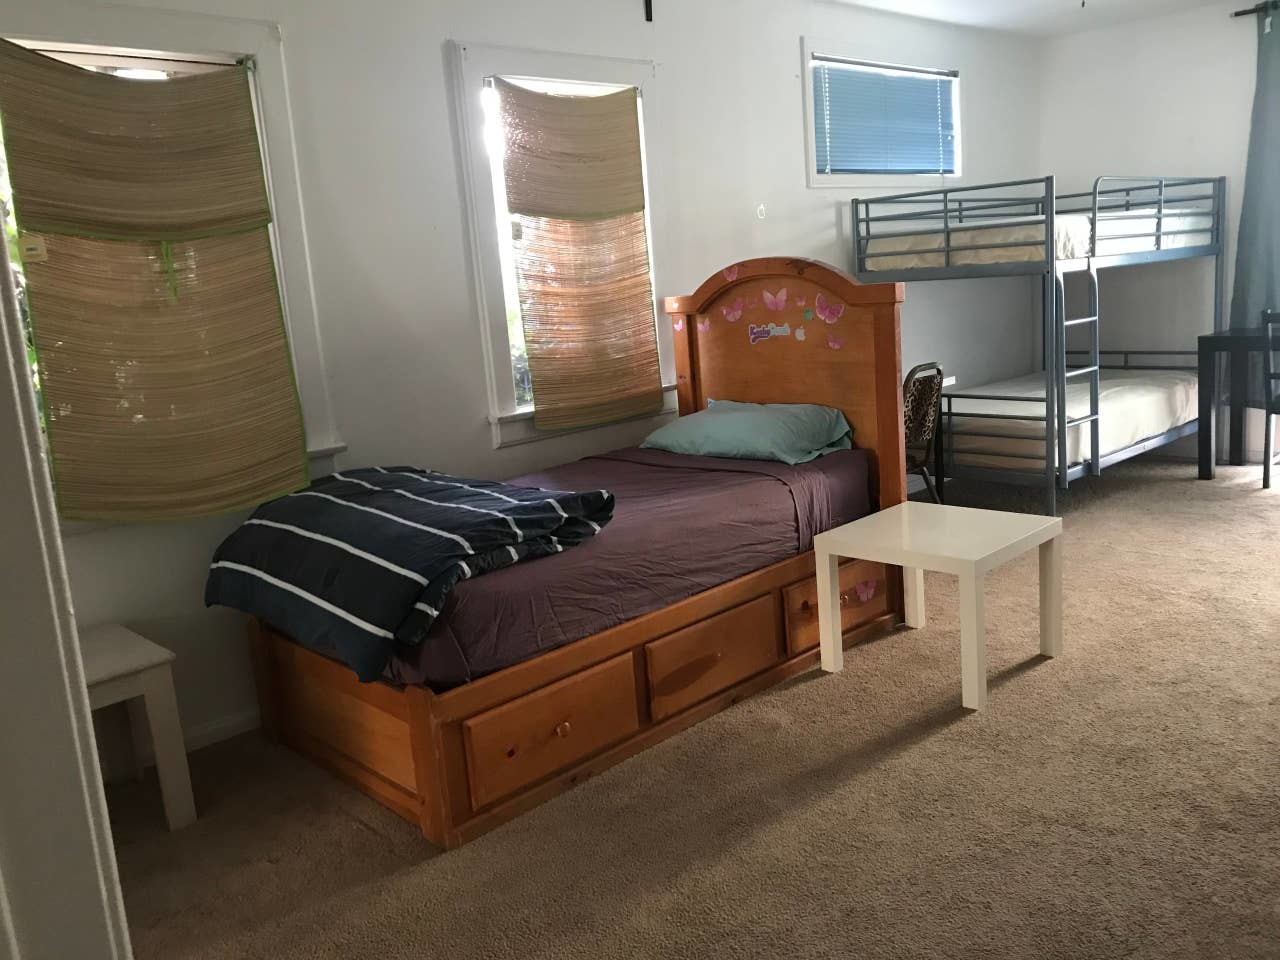 Bed In Shared Bedroom 10 Minutes To Ucla